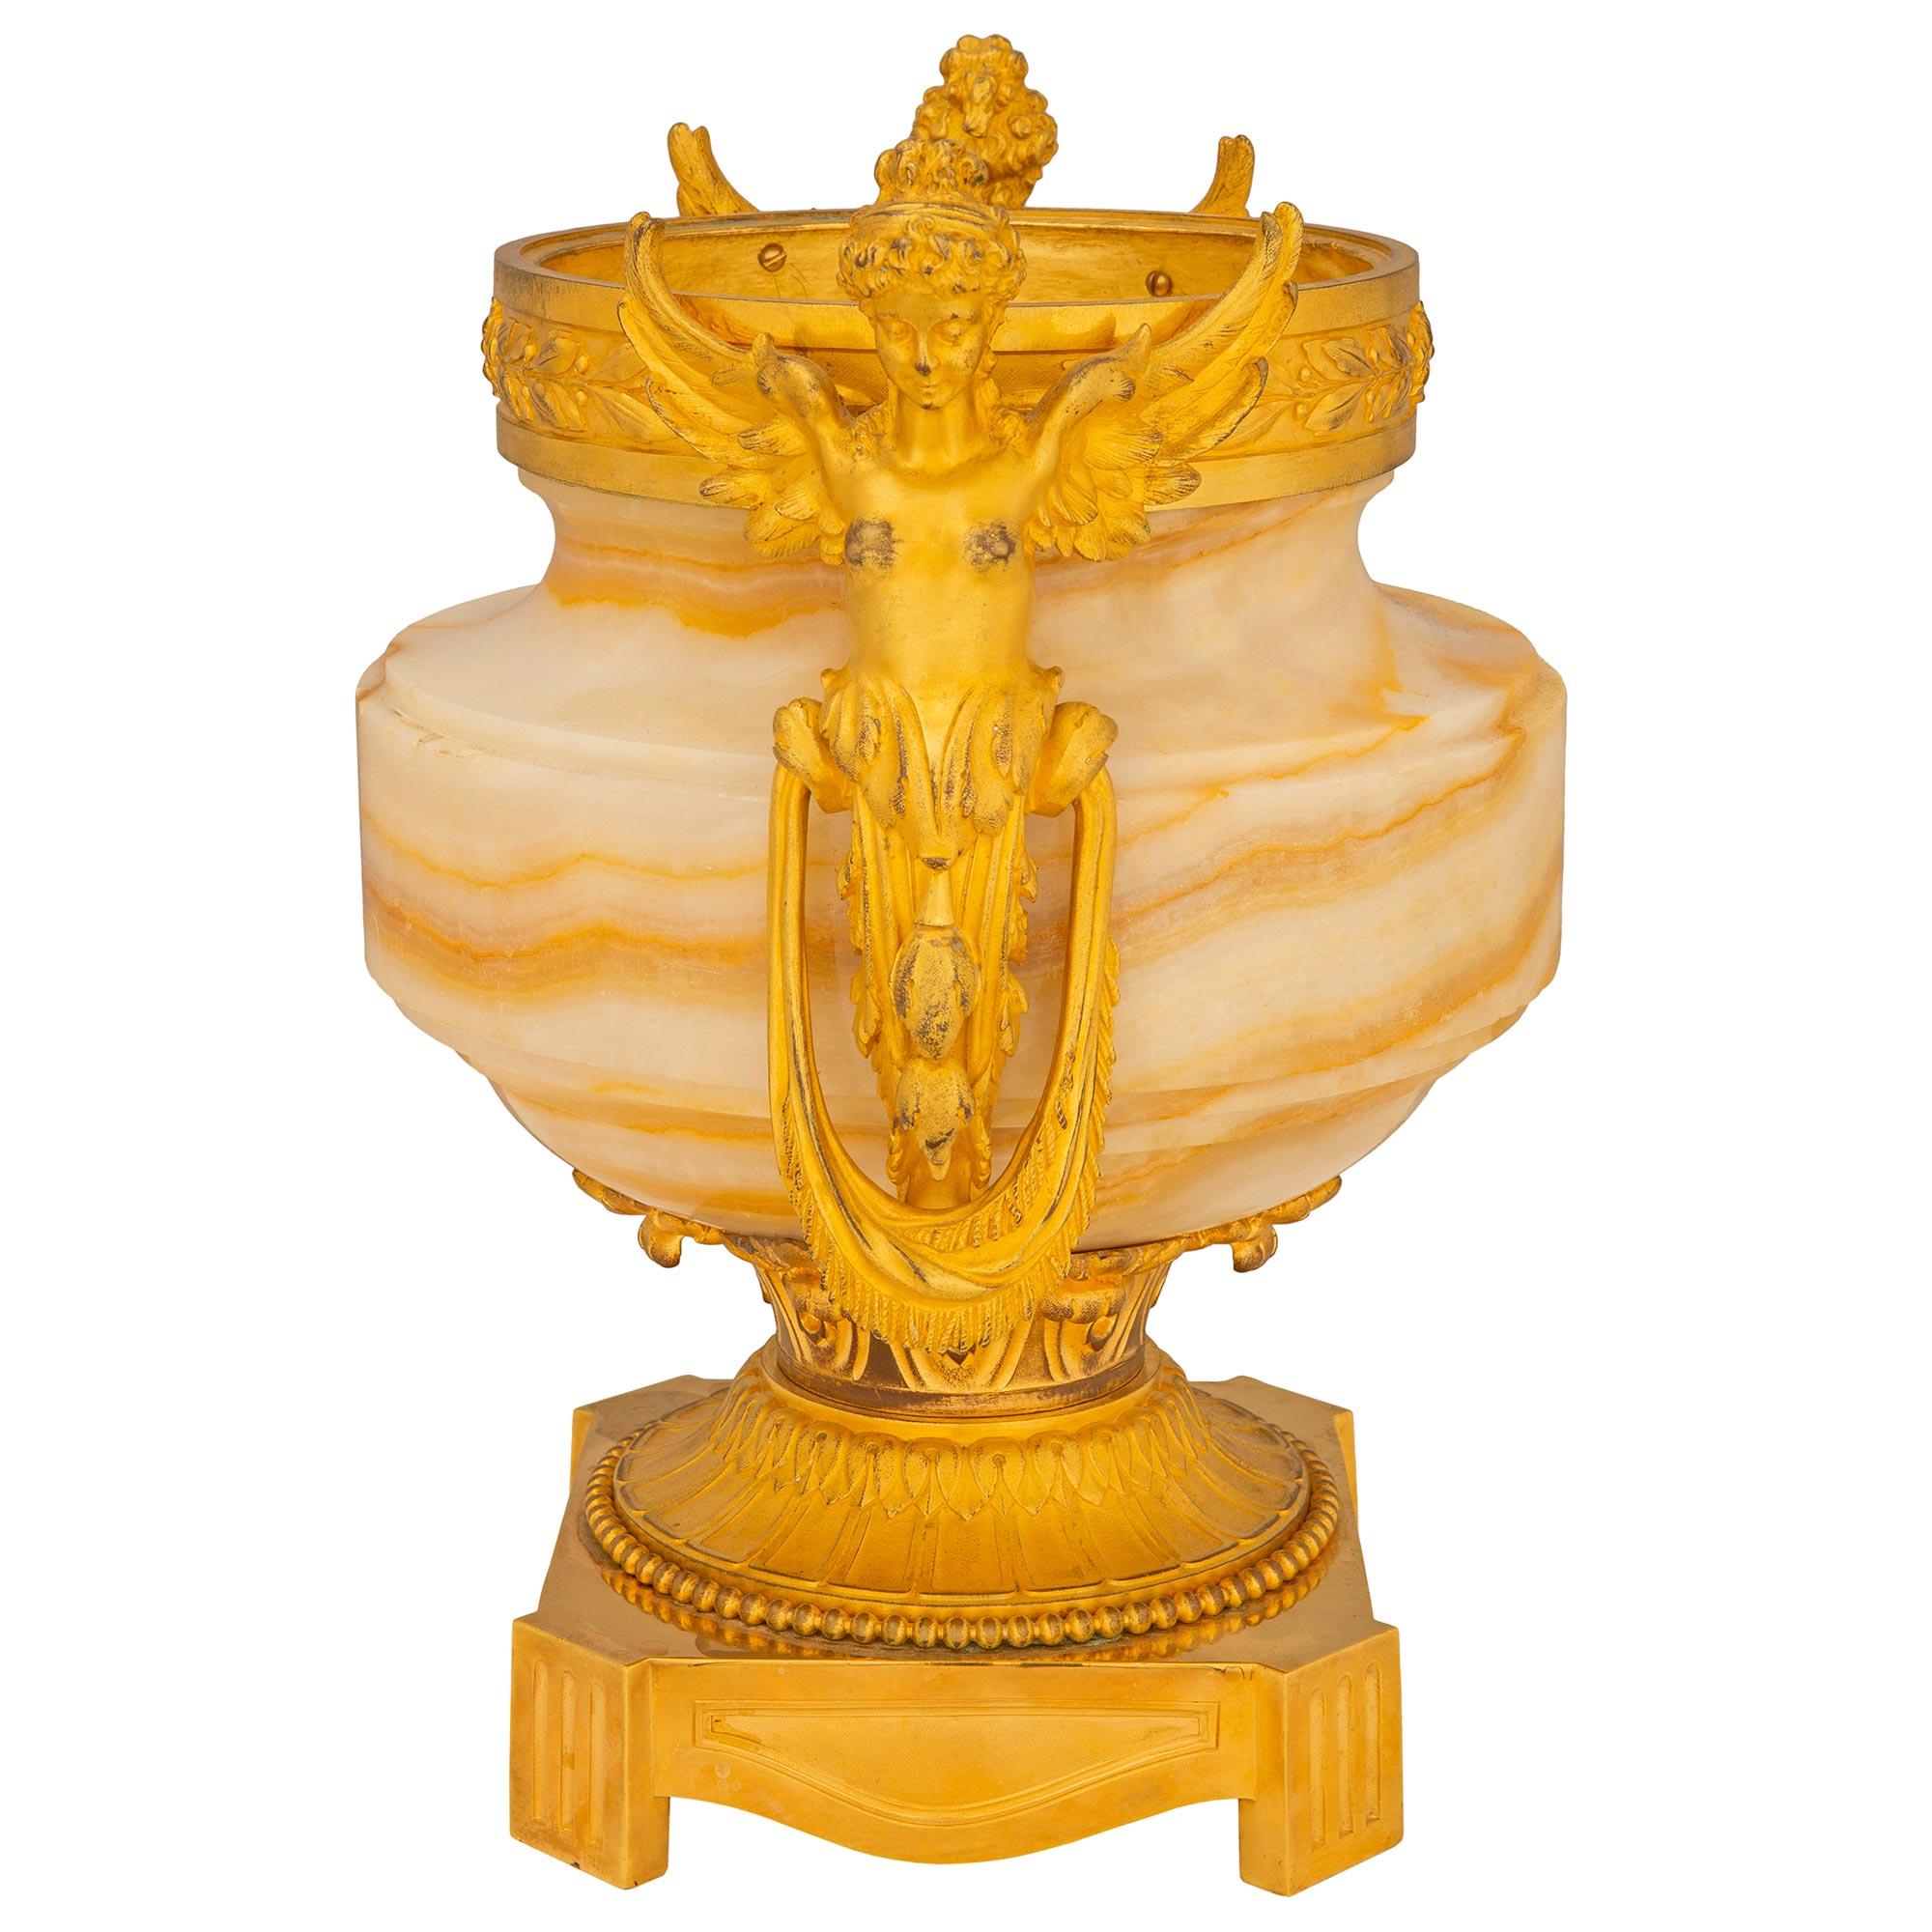 French 19th Century Louis XVI St. Belle Époque Period Onyx and Ormolu Urn For Sale 2